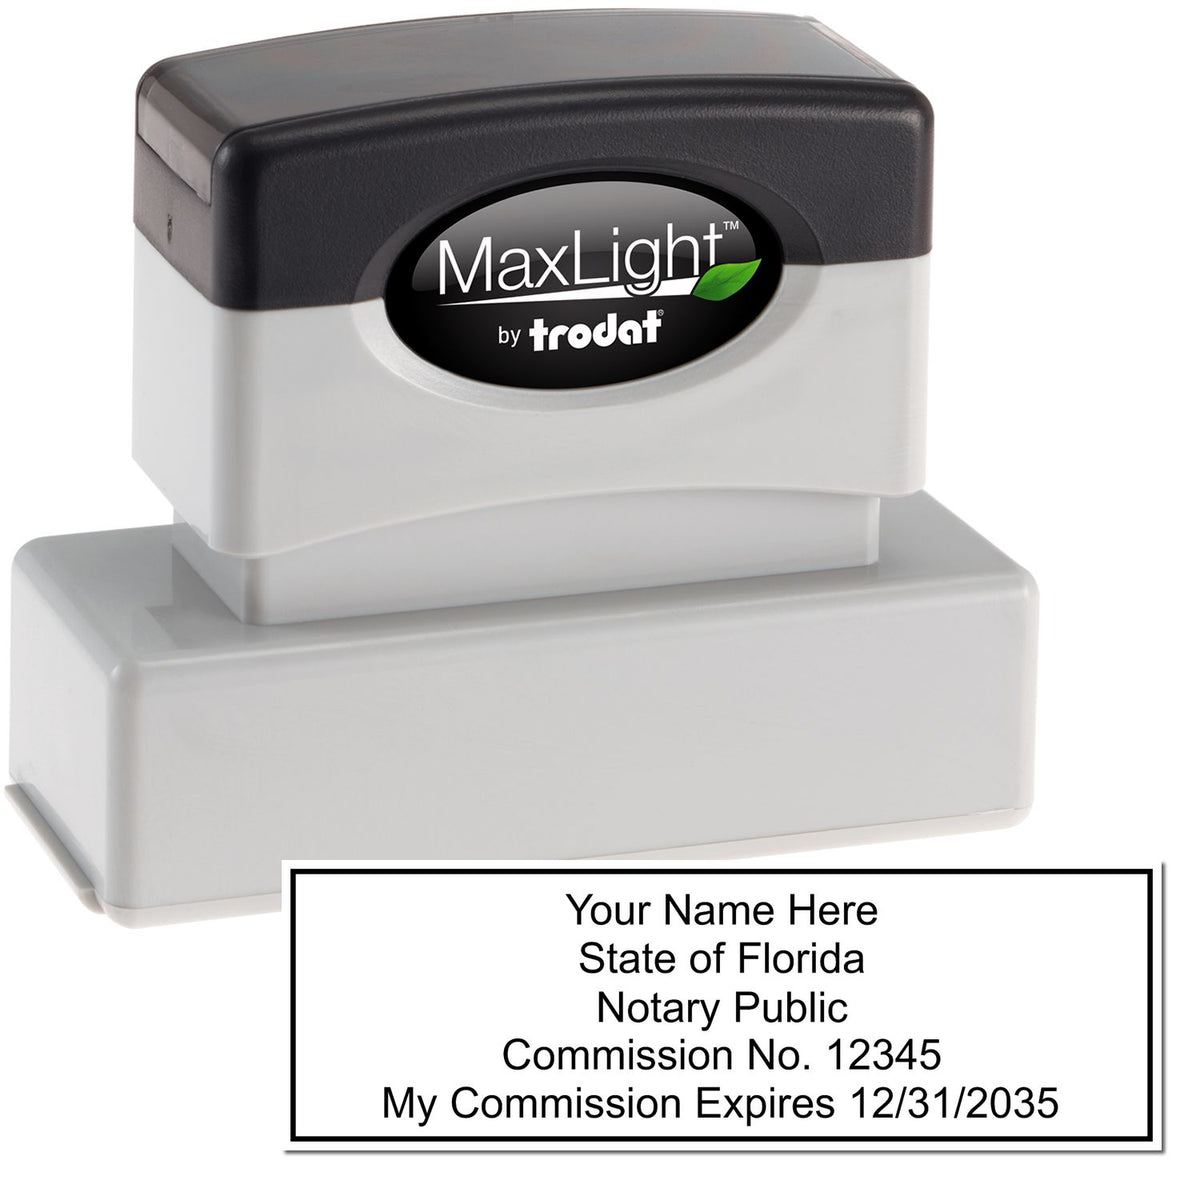 The main image for the MaxLight Premium Pre-Inked Florida Rectangular Notarial Stamp depicting a sample of the imprint and electronic files